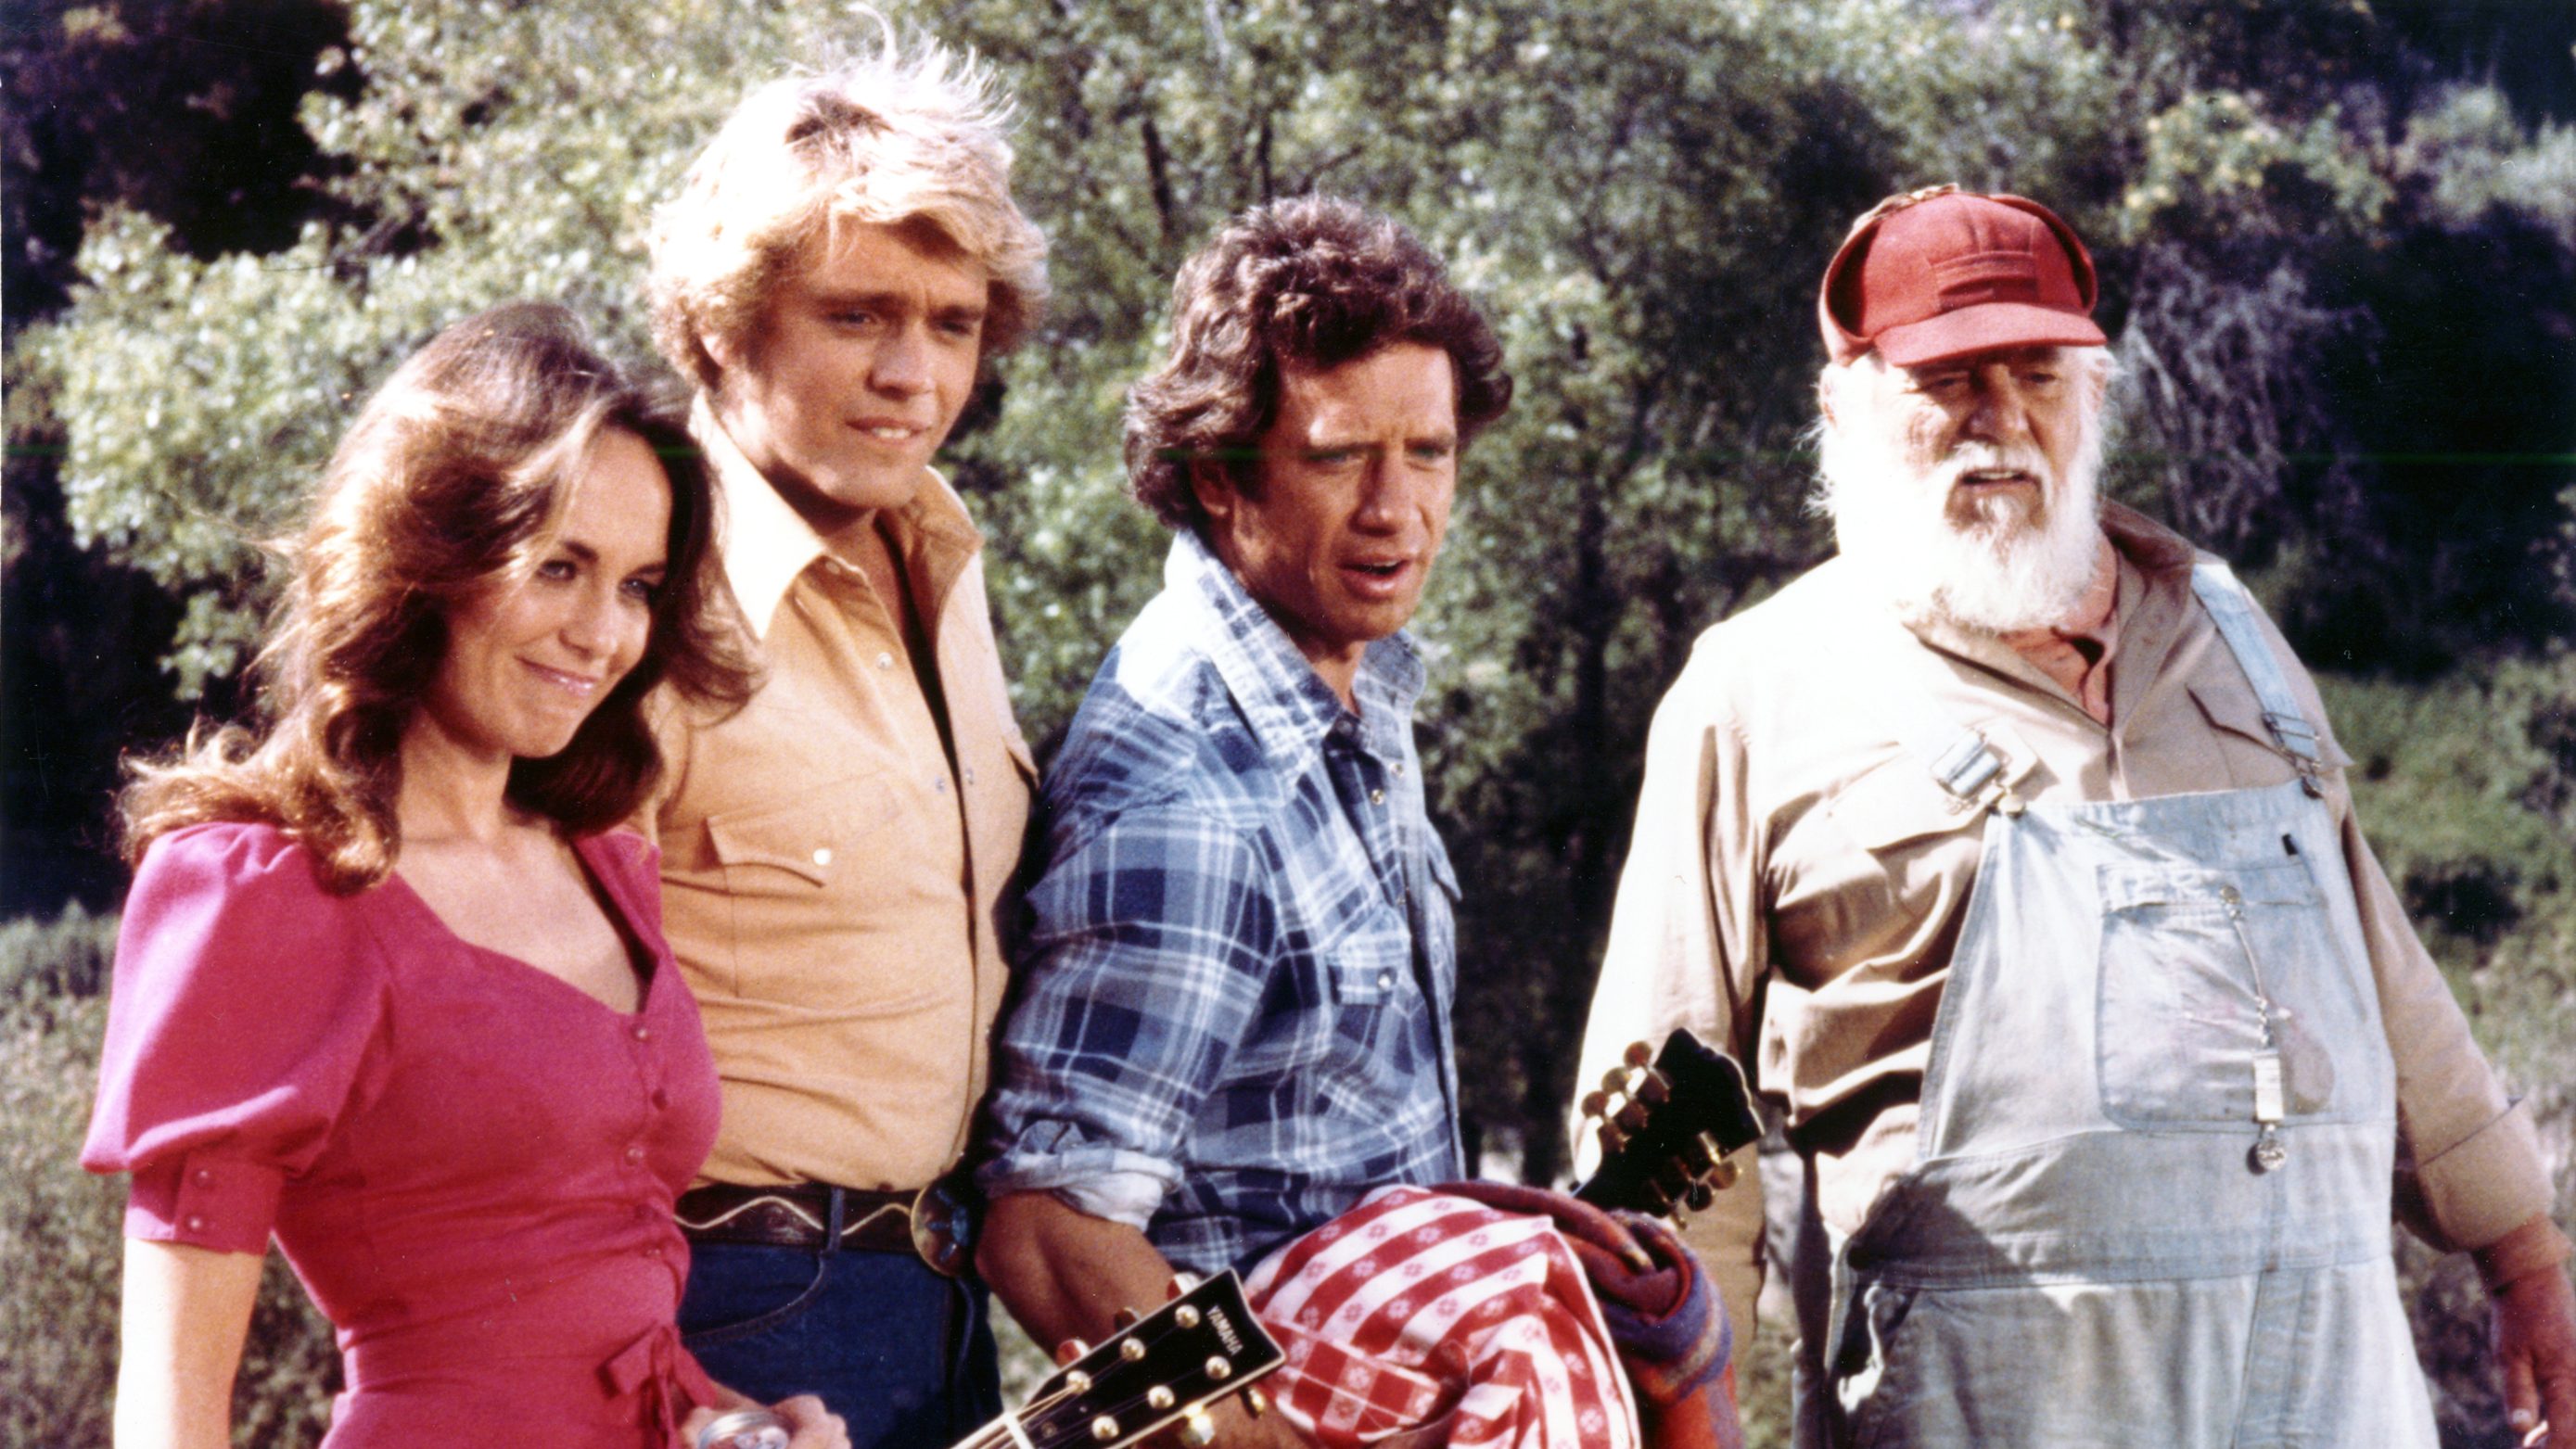 Denver Pyle, John Schneider, Catherine Bach and Tom Wopat, The Dukes of Hazzard